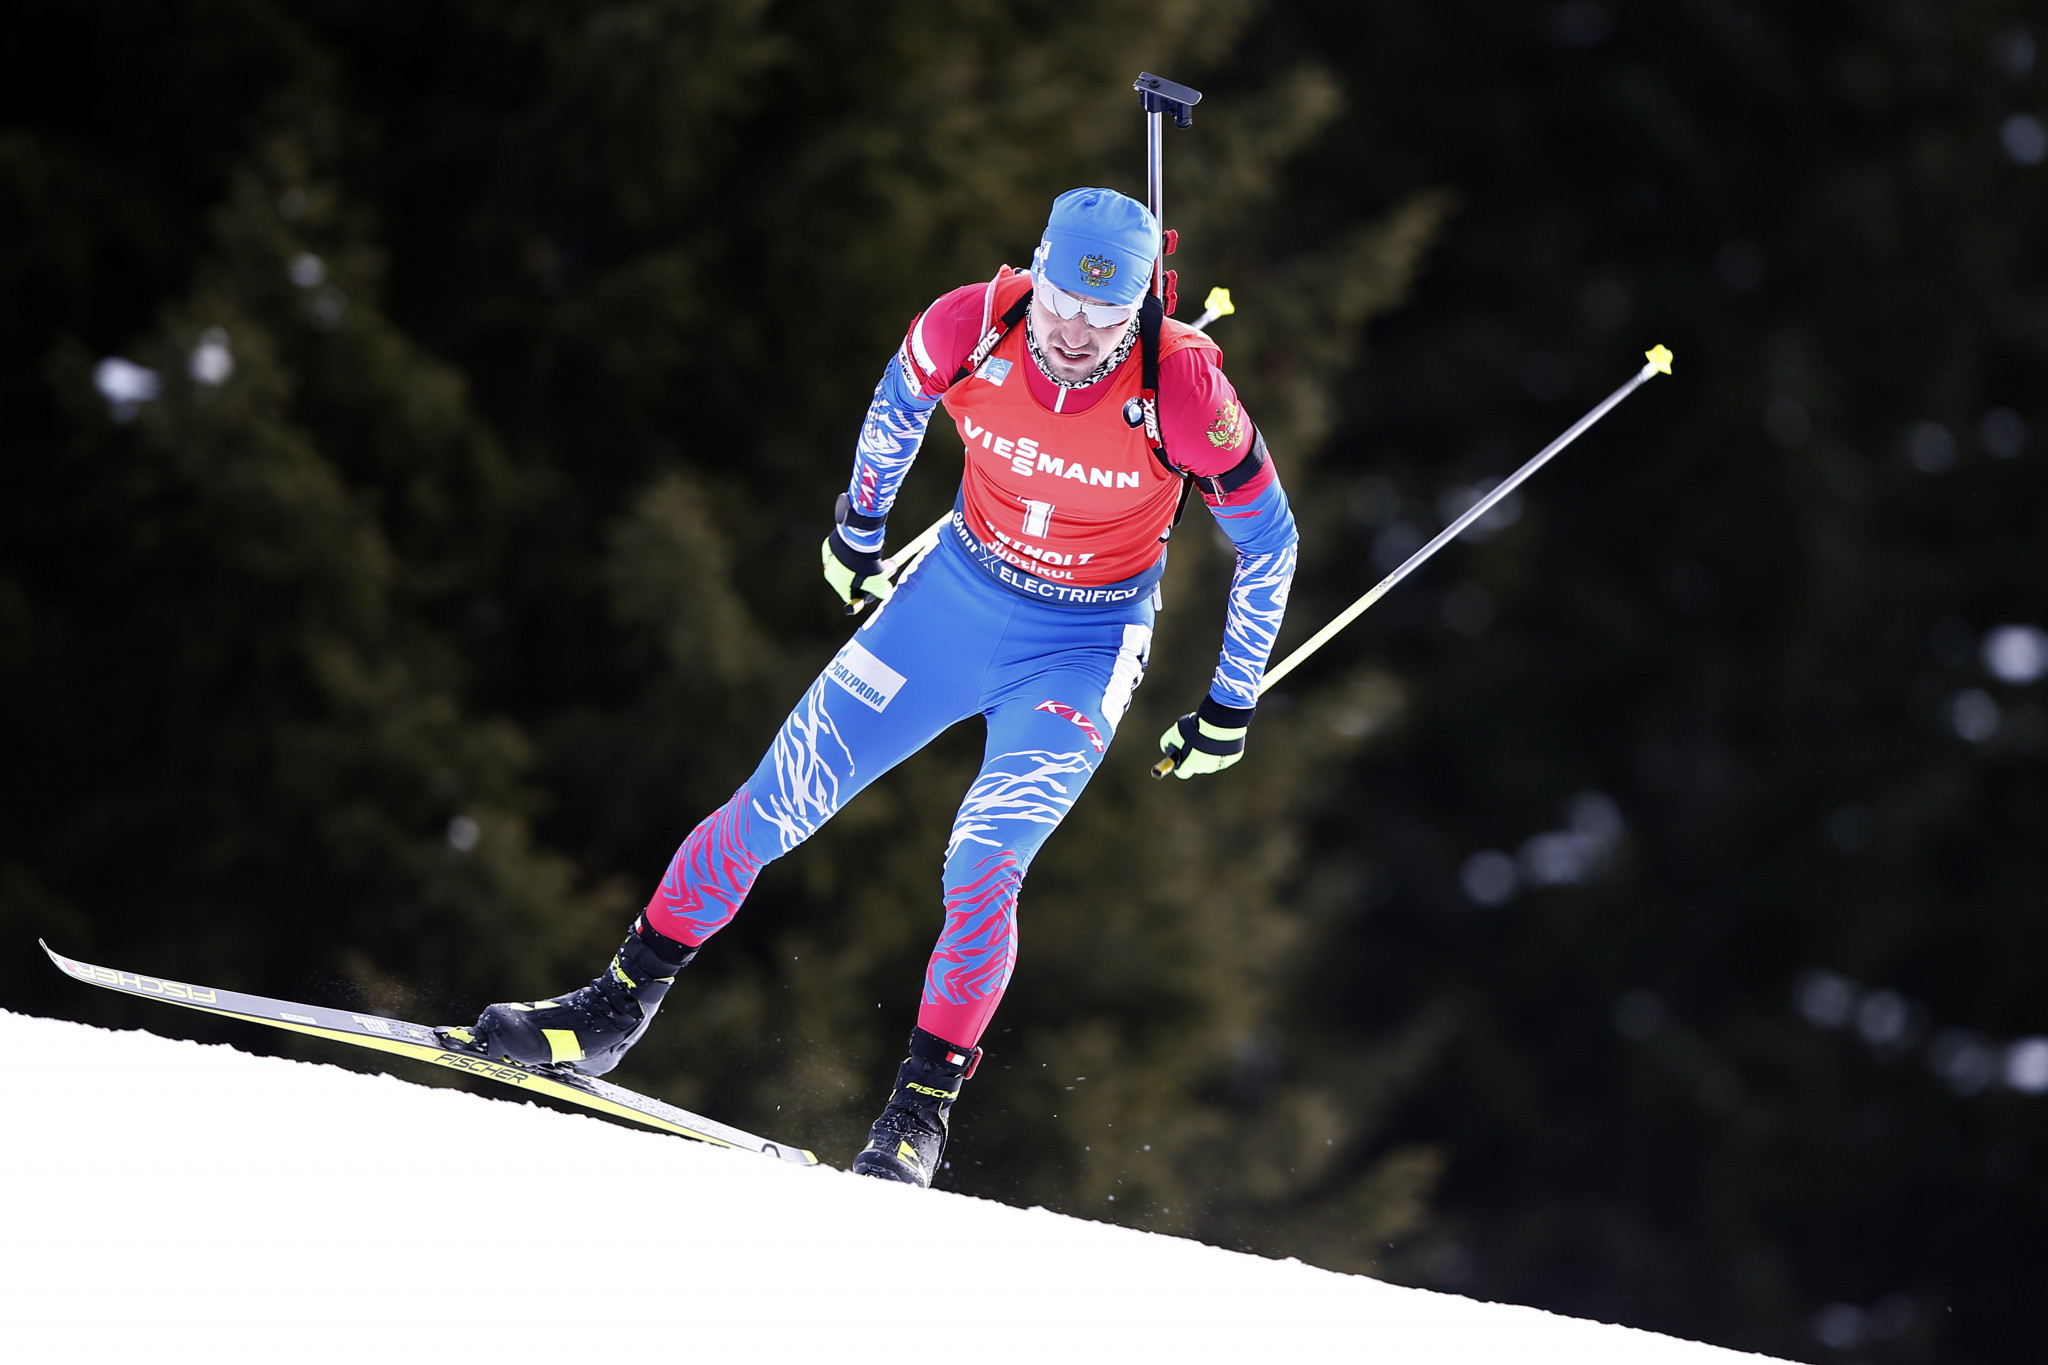 Alexander Loginov and his coach were targeted in the raid at the Biathlon World Championships ©Getty Images